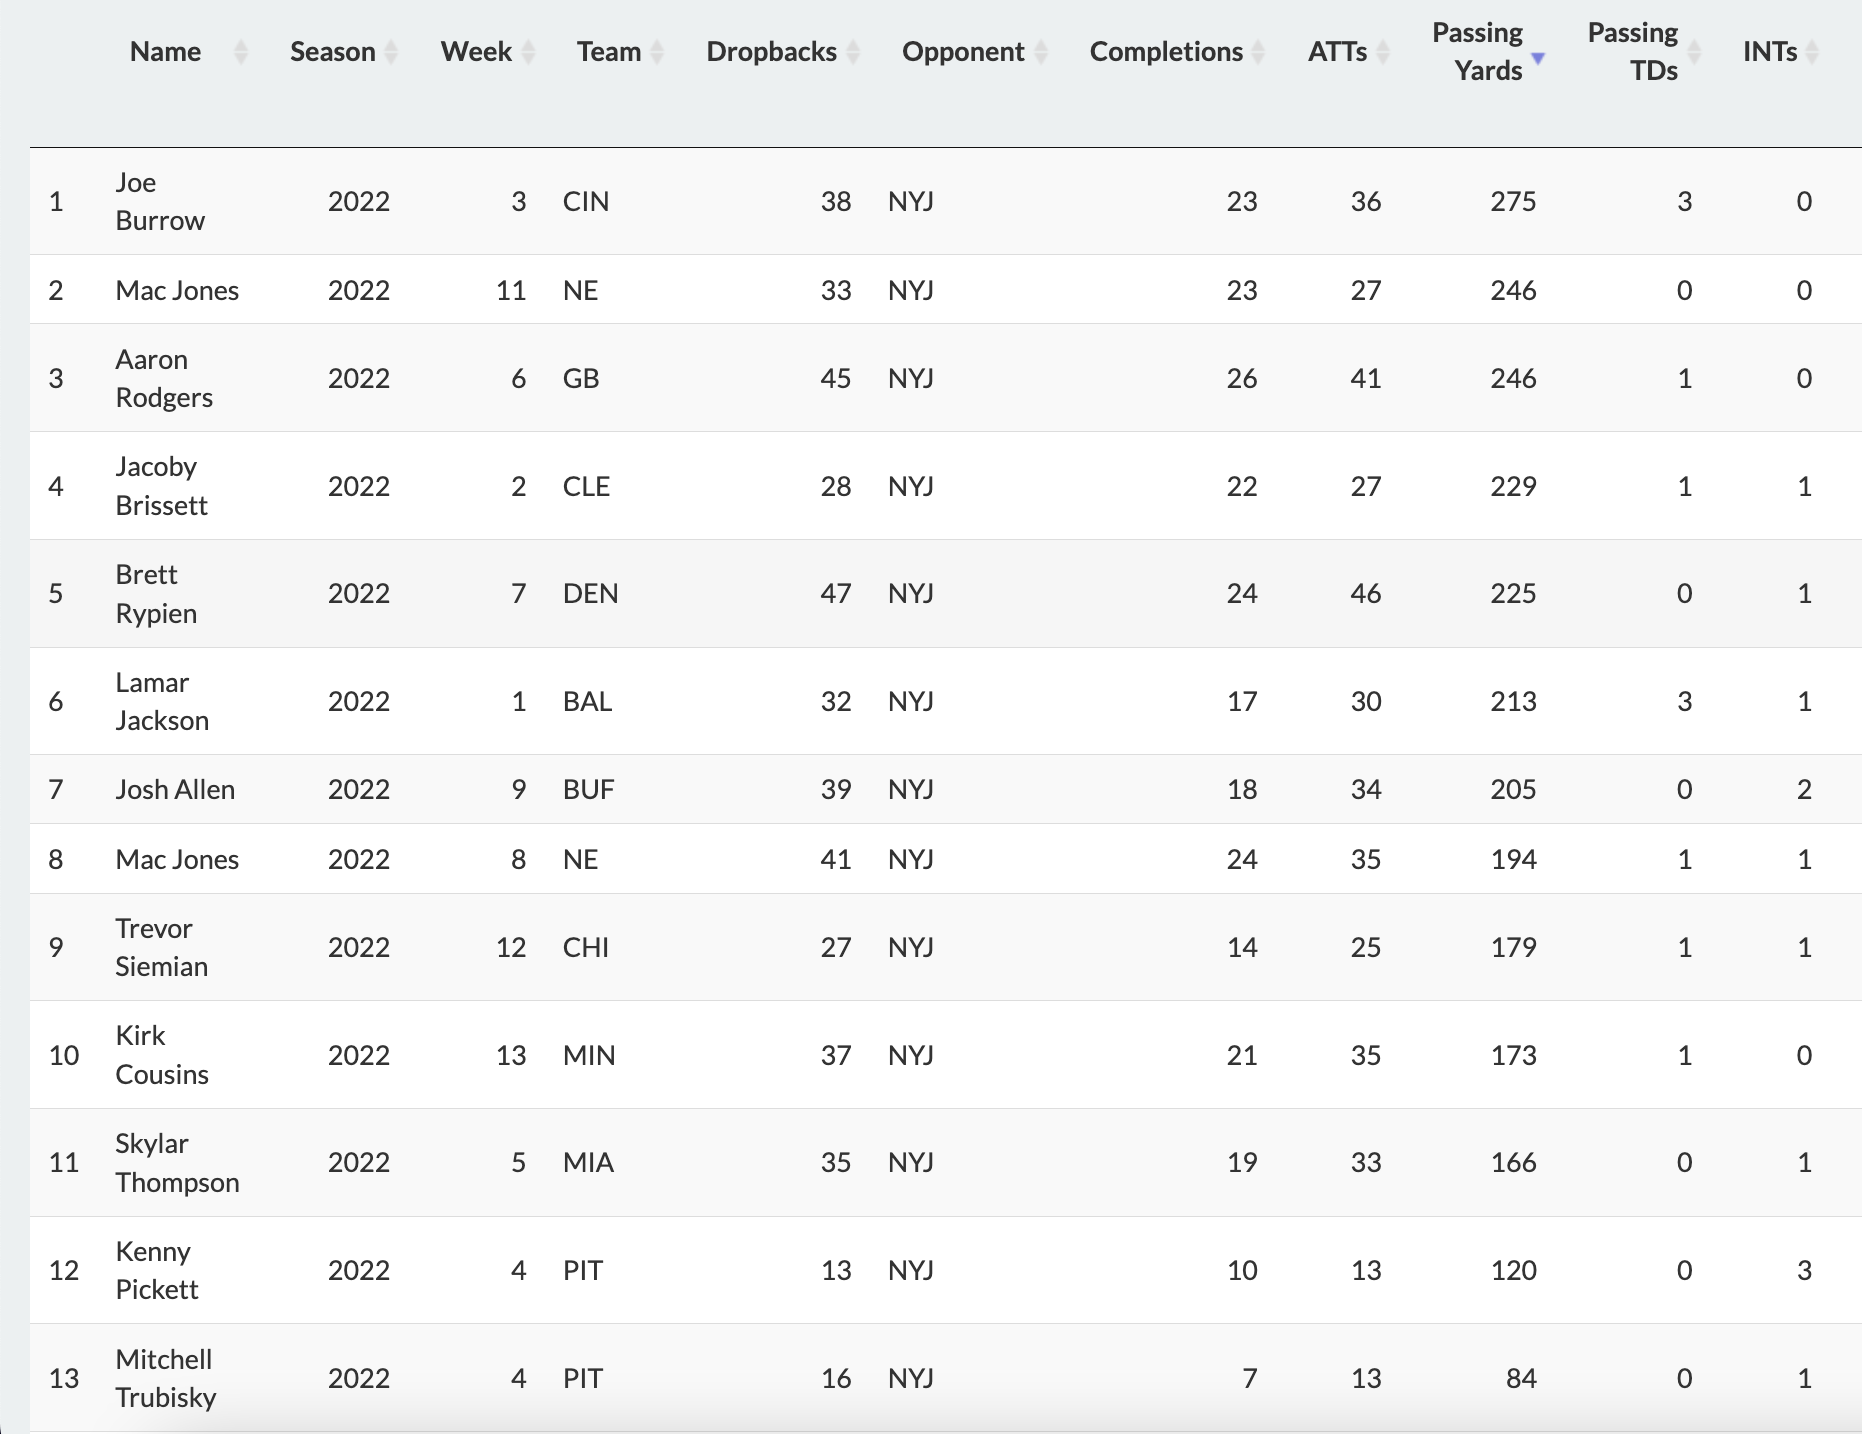 Quarterbacks vs. NYJ in 2022, sorted by Passing Yards.